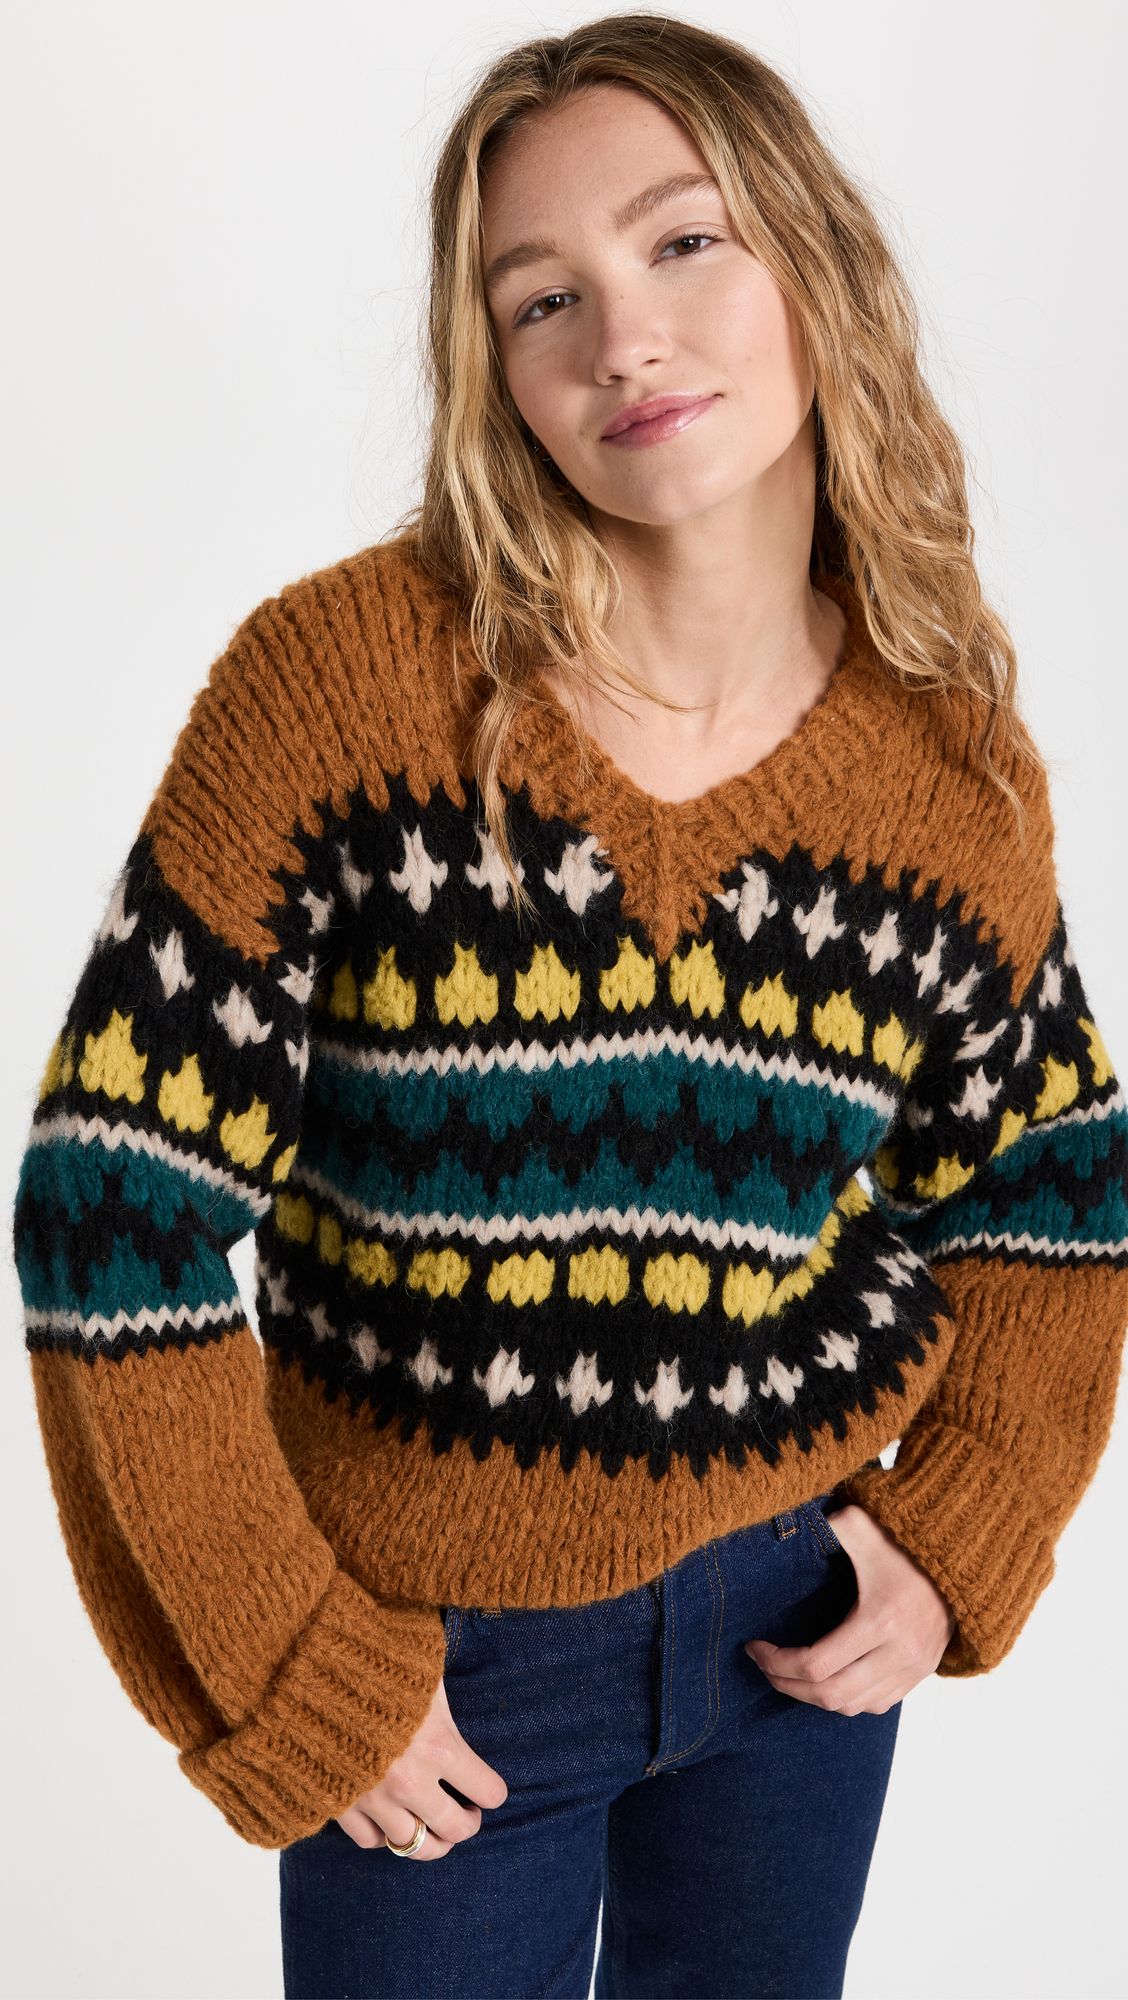 Shop the 24 Best Fair Isle Sweaters, Starting at $36 | Who What Wear